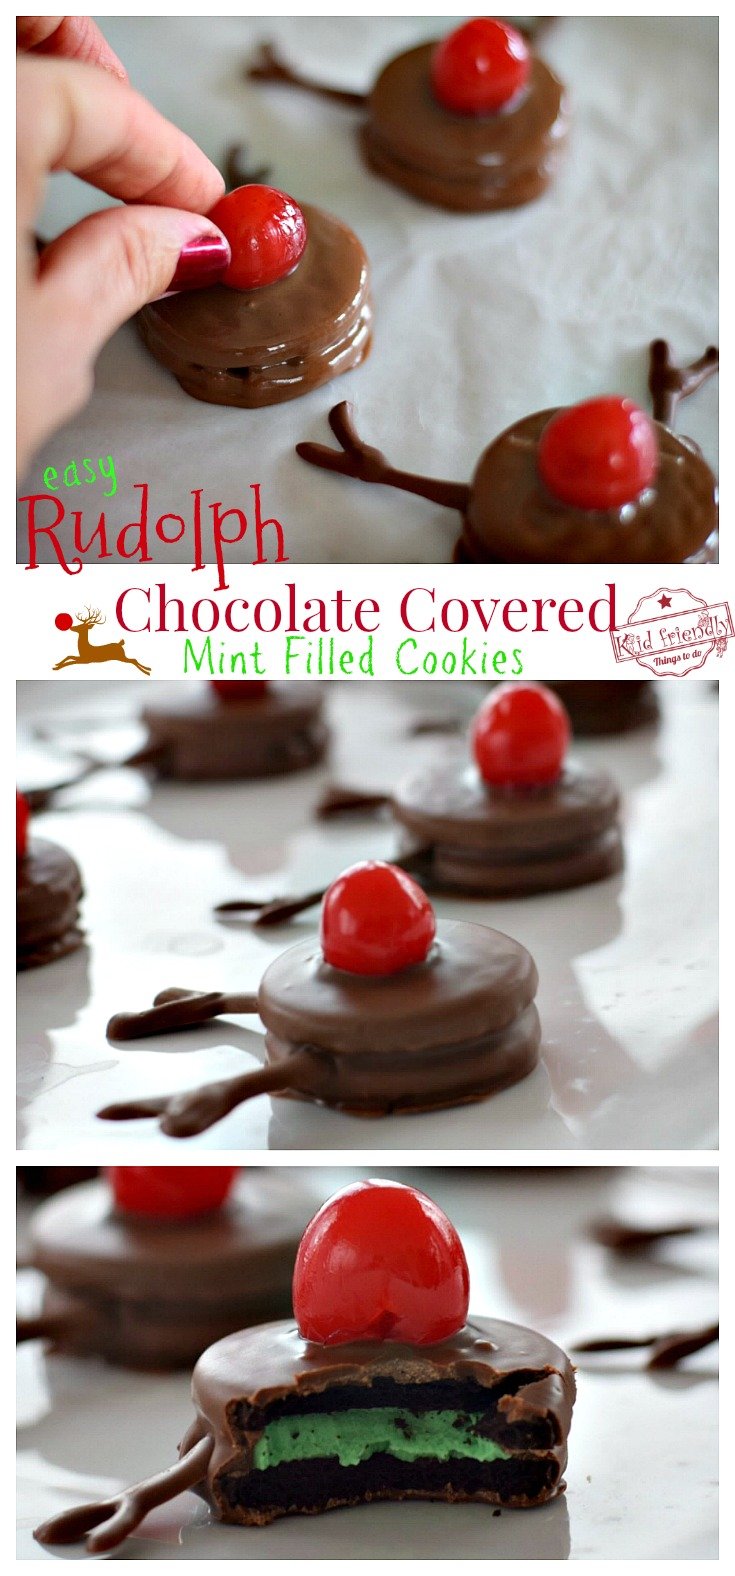 Easy Rudolph Chocolate Covered Mint Stuffed Cookies! - A Cute and Yummy Dessert - Perfect and Simple DIY for Christmas parties or fun food craft with the kids - www.kidfriendlythingstodo.com